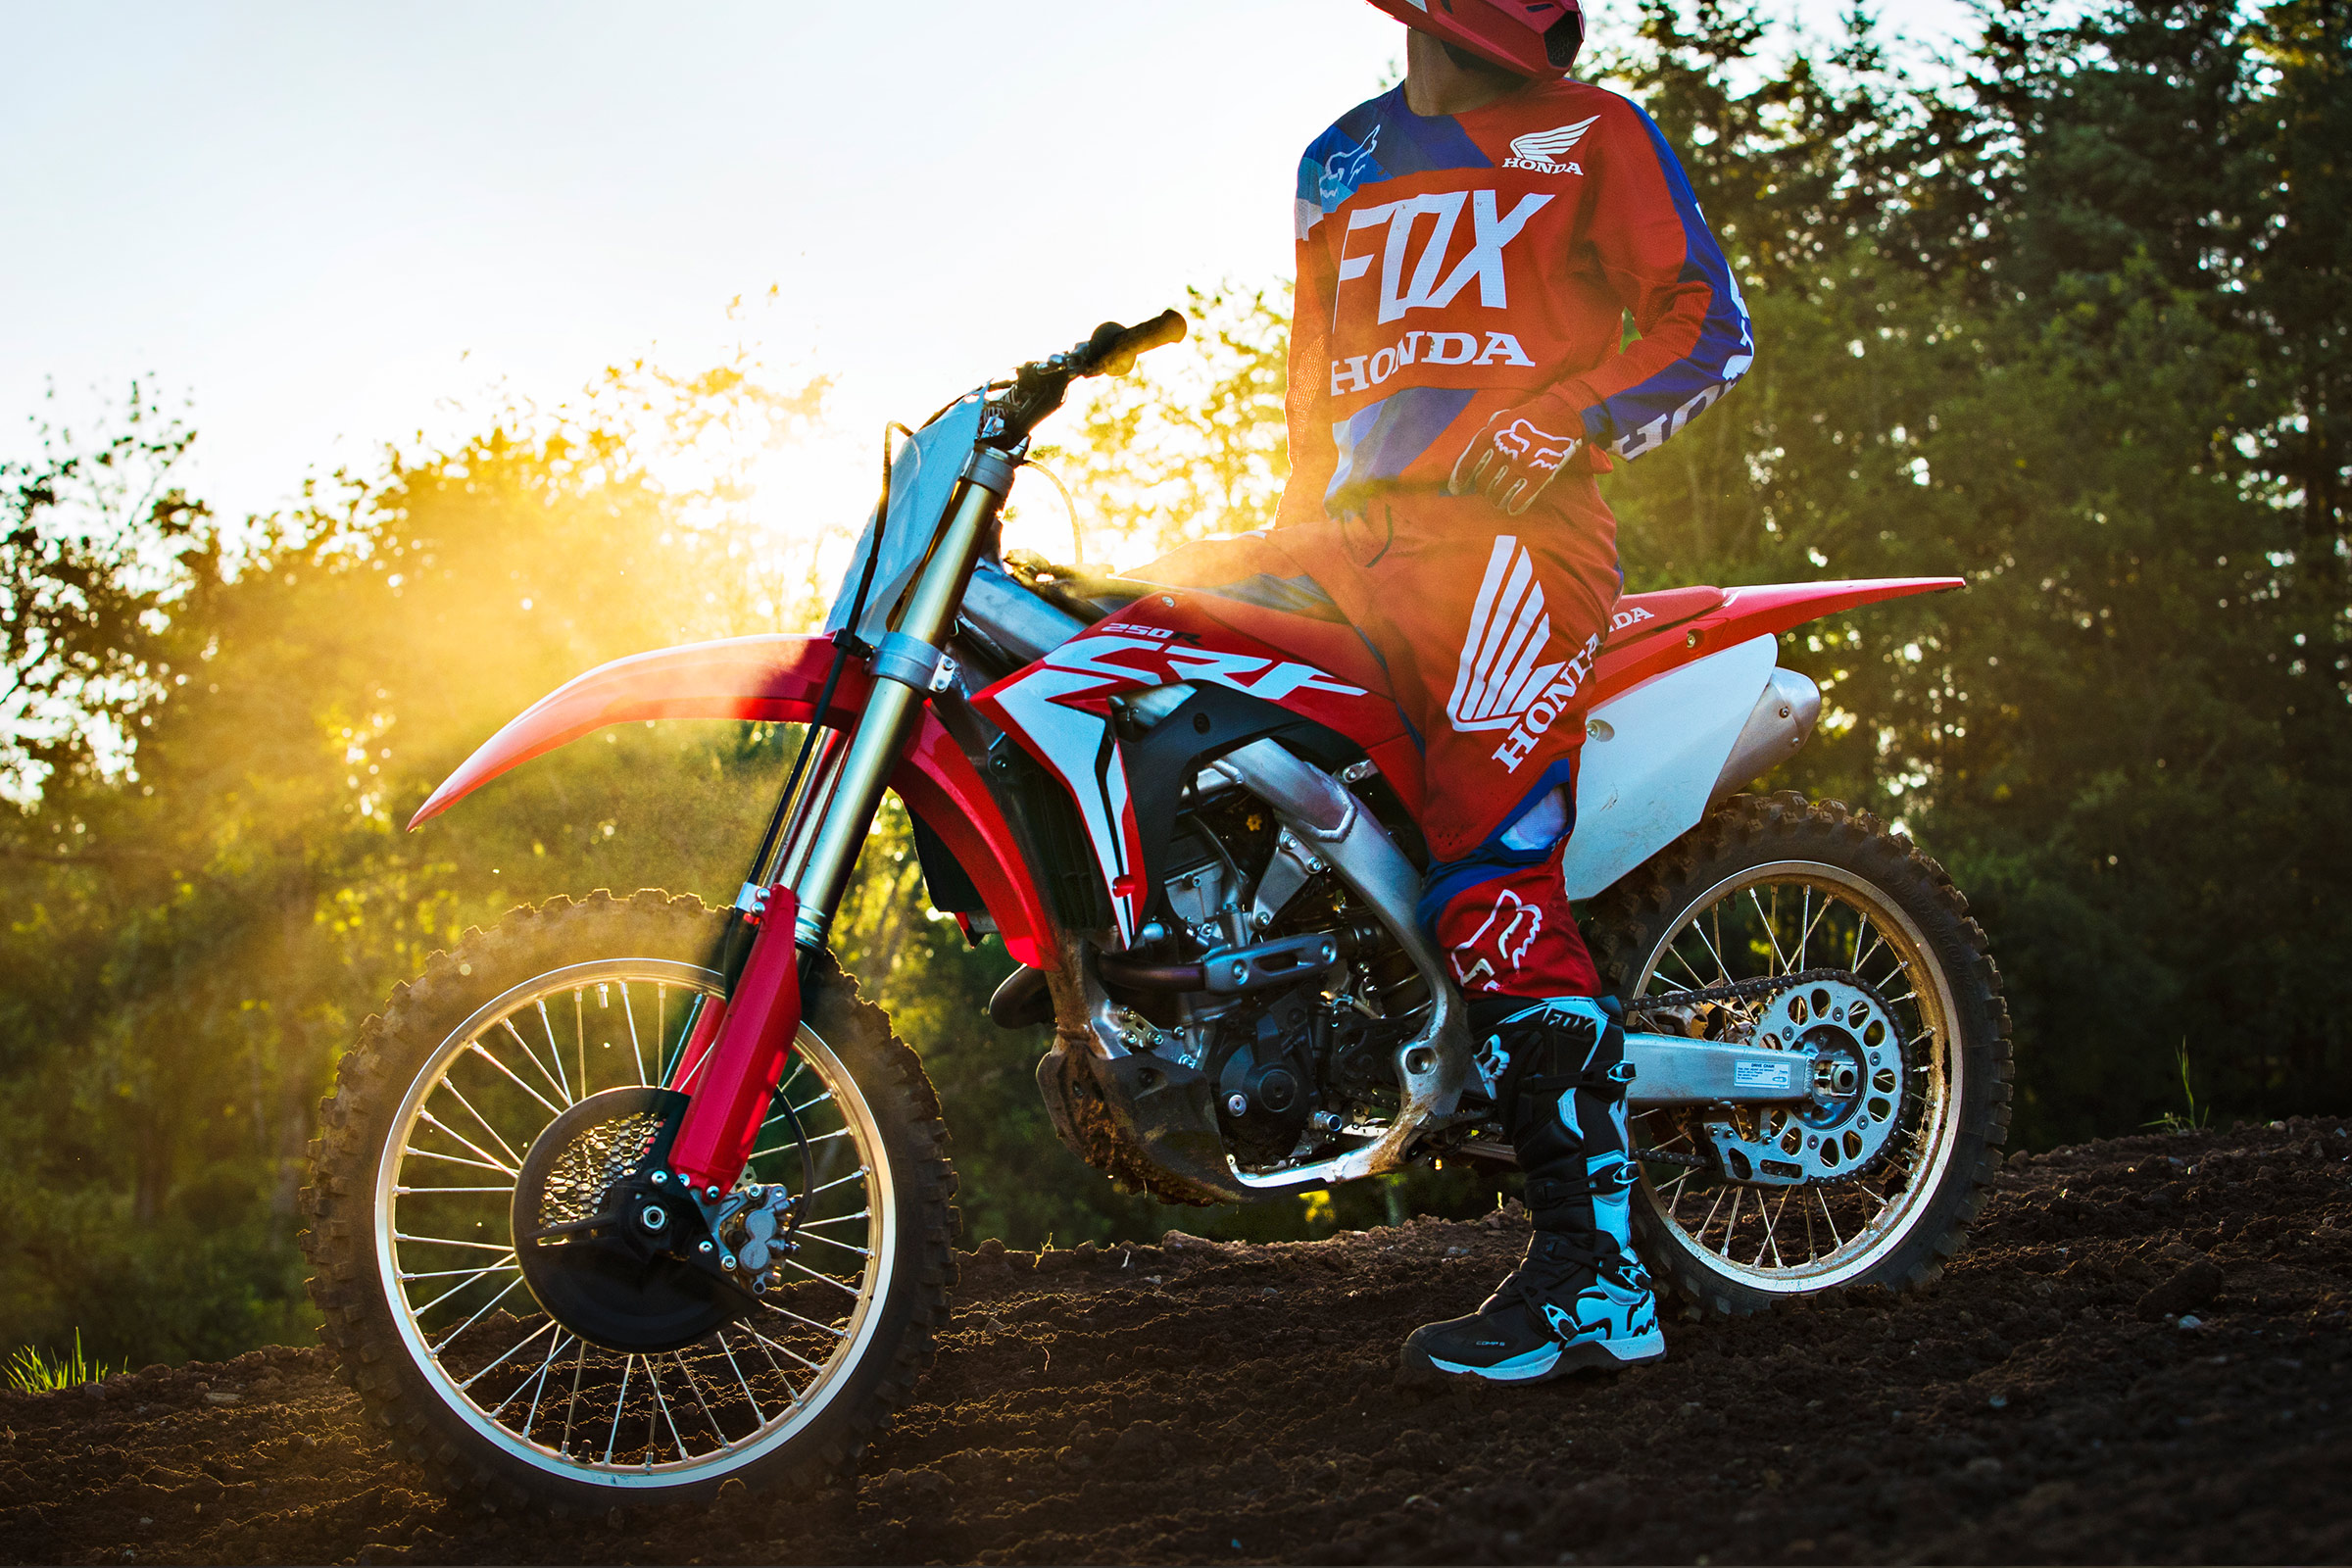 2018 Honda Crf250r First Ride Review 8339